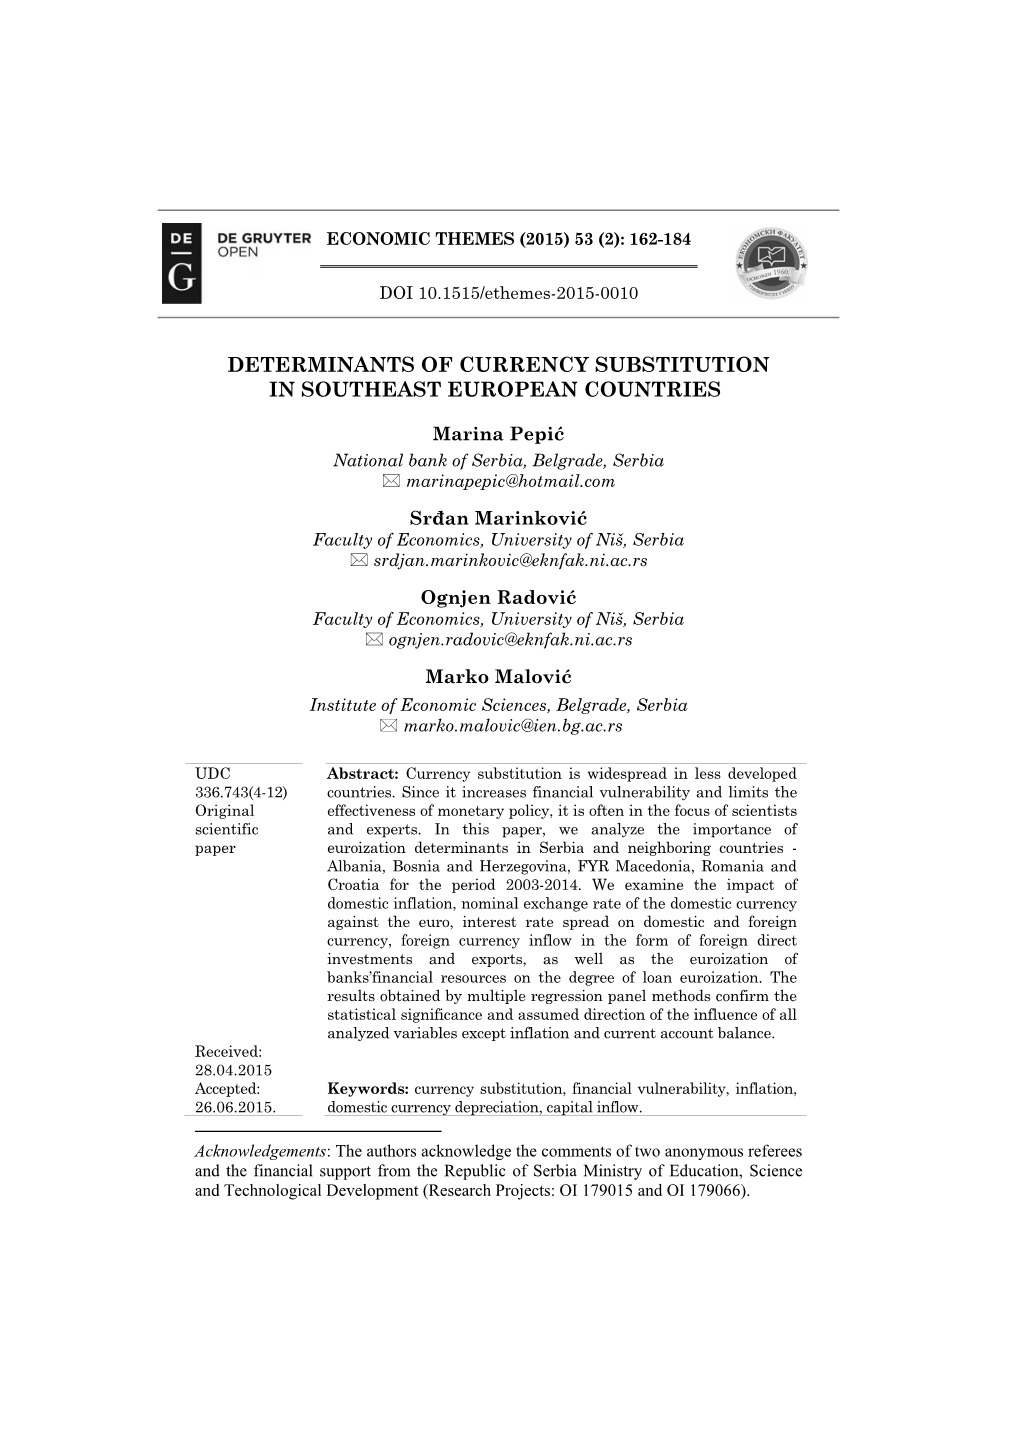 Determinants of Currency Substitution in Southeast European Countries1